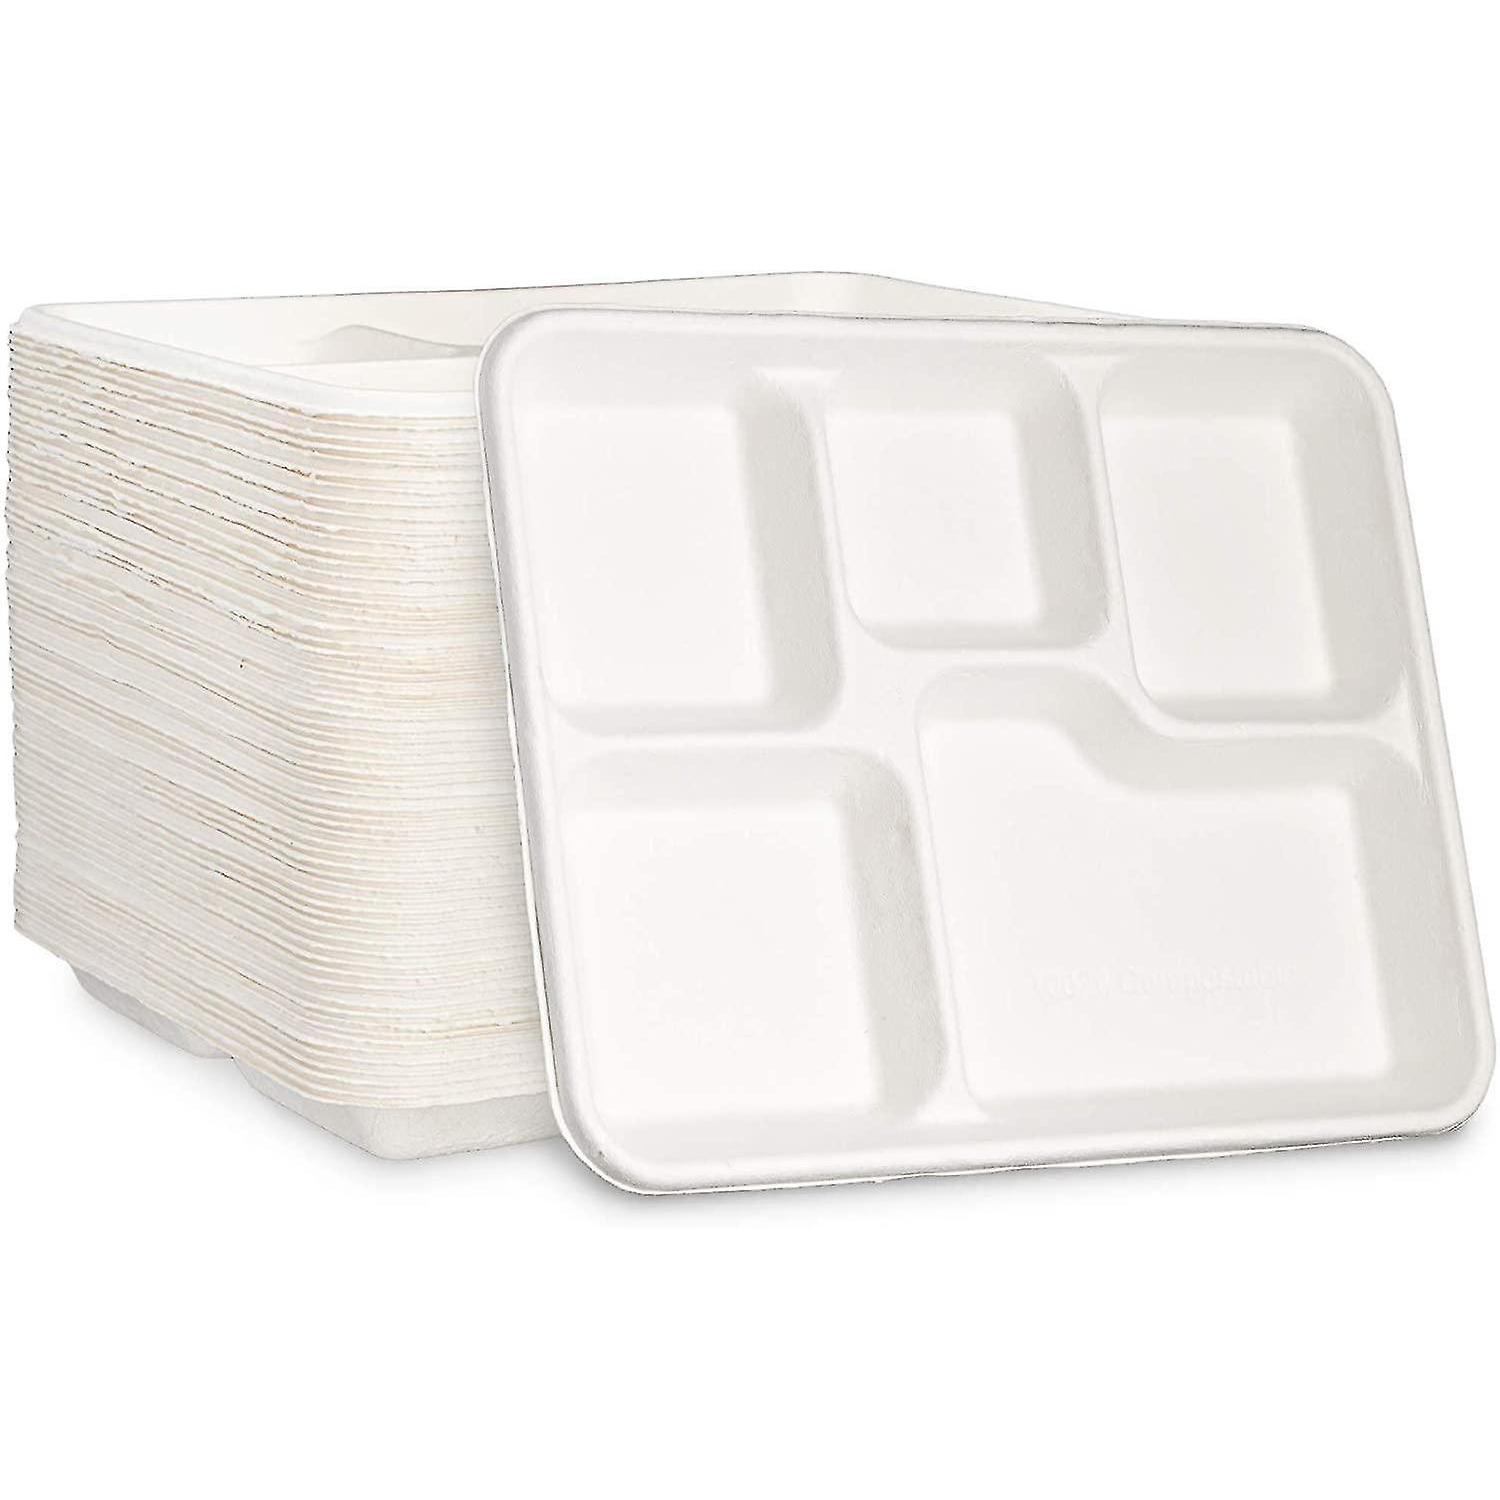 5 COMPARTMENT SUGARCANE TRAY – SHALLOW (125) – Packaging, Eco Range (PGE-10159)